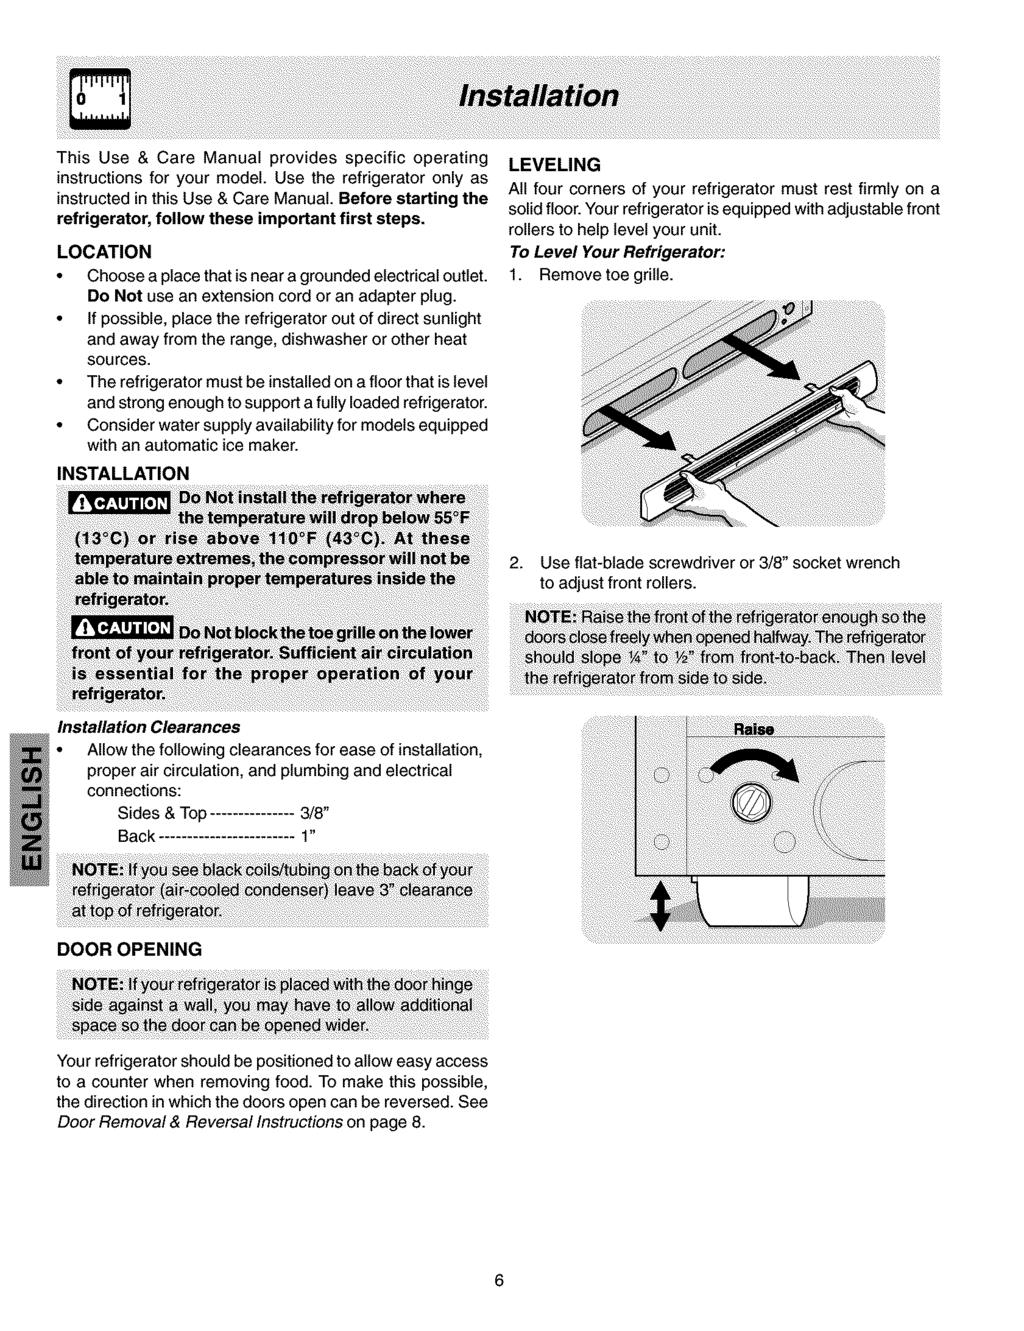 This Use & Care Manual provides specific operating instructions for your model. Use the refrigerator only as instructed in this Use & Care Manual.